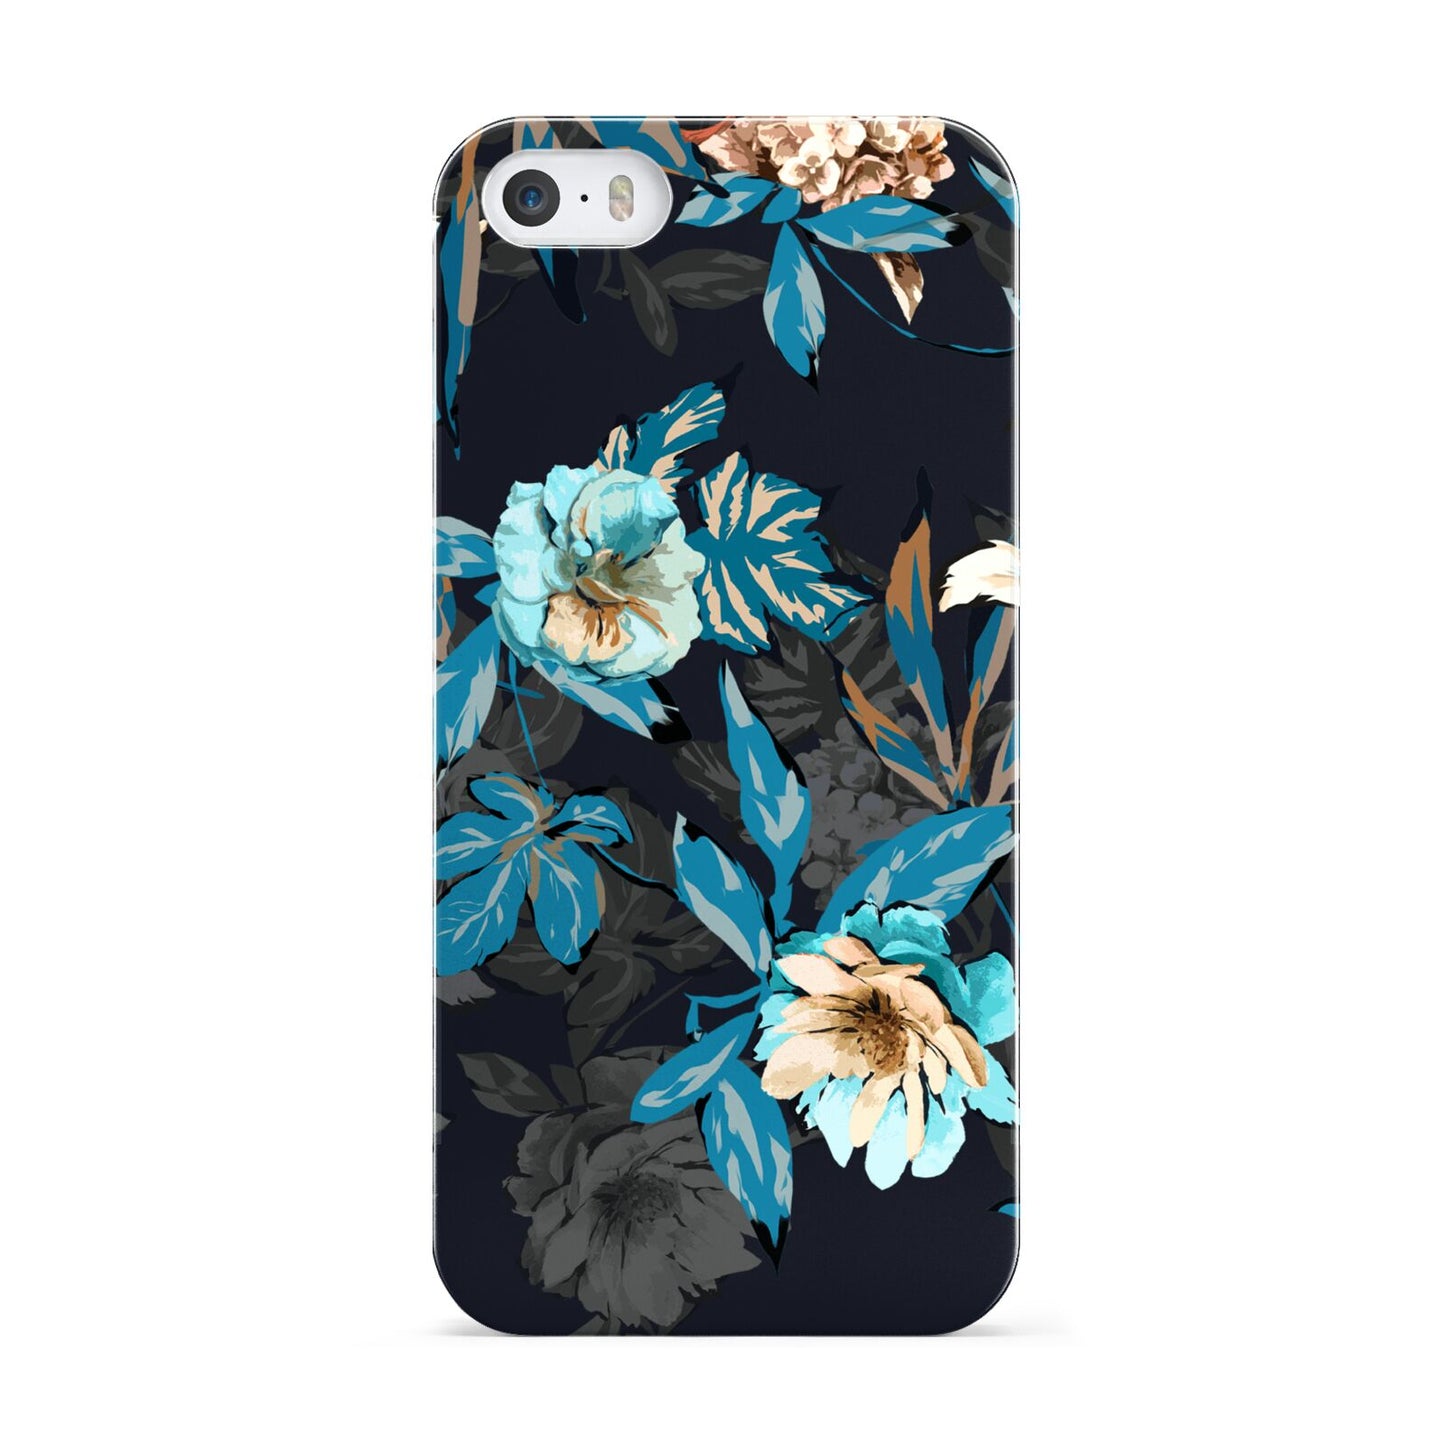 Blossom Flowers Apple iPhone 5 Case